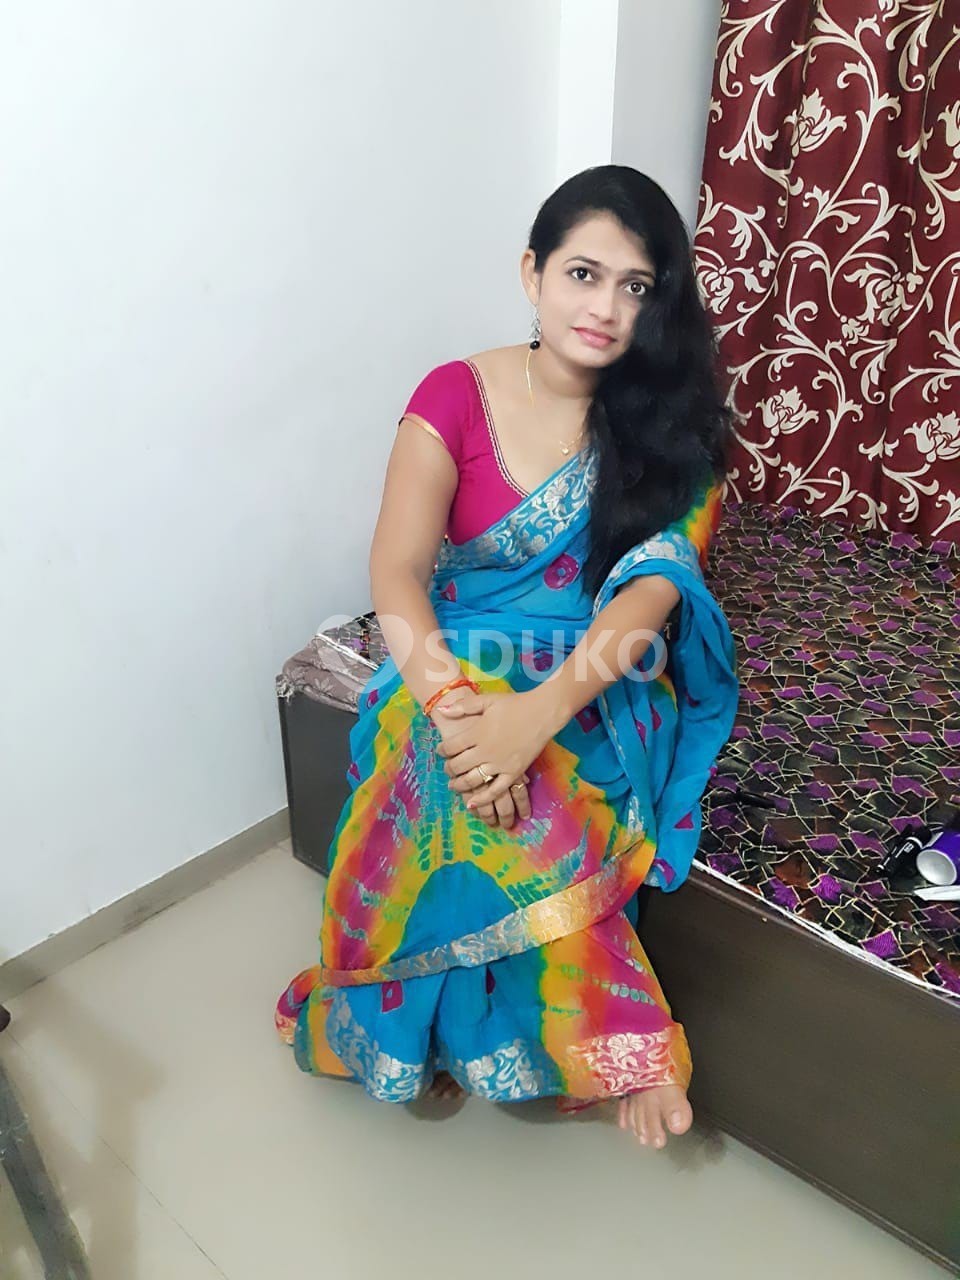 Kharagpur,, myself,, Mallika TODAY LOW PRICE 100% SAFE AND SECURE GENUINE CALL GIRL AFFORDABLE PRICE CALL NOW